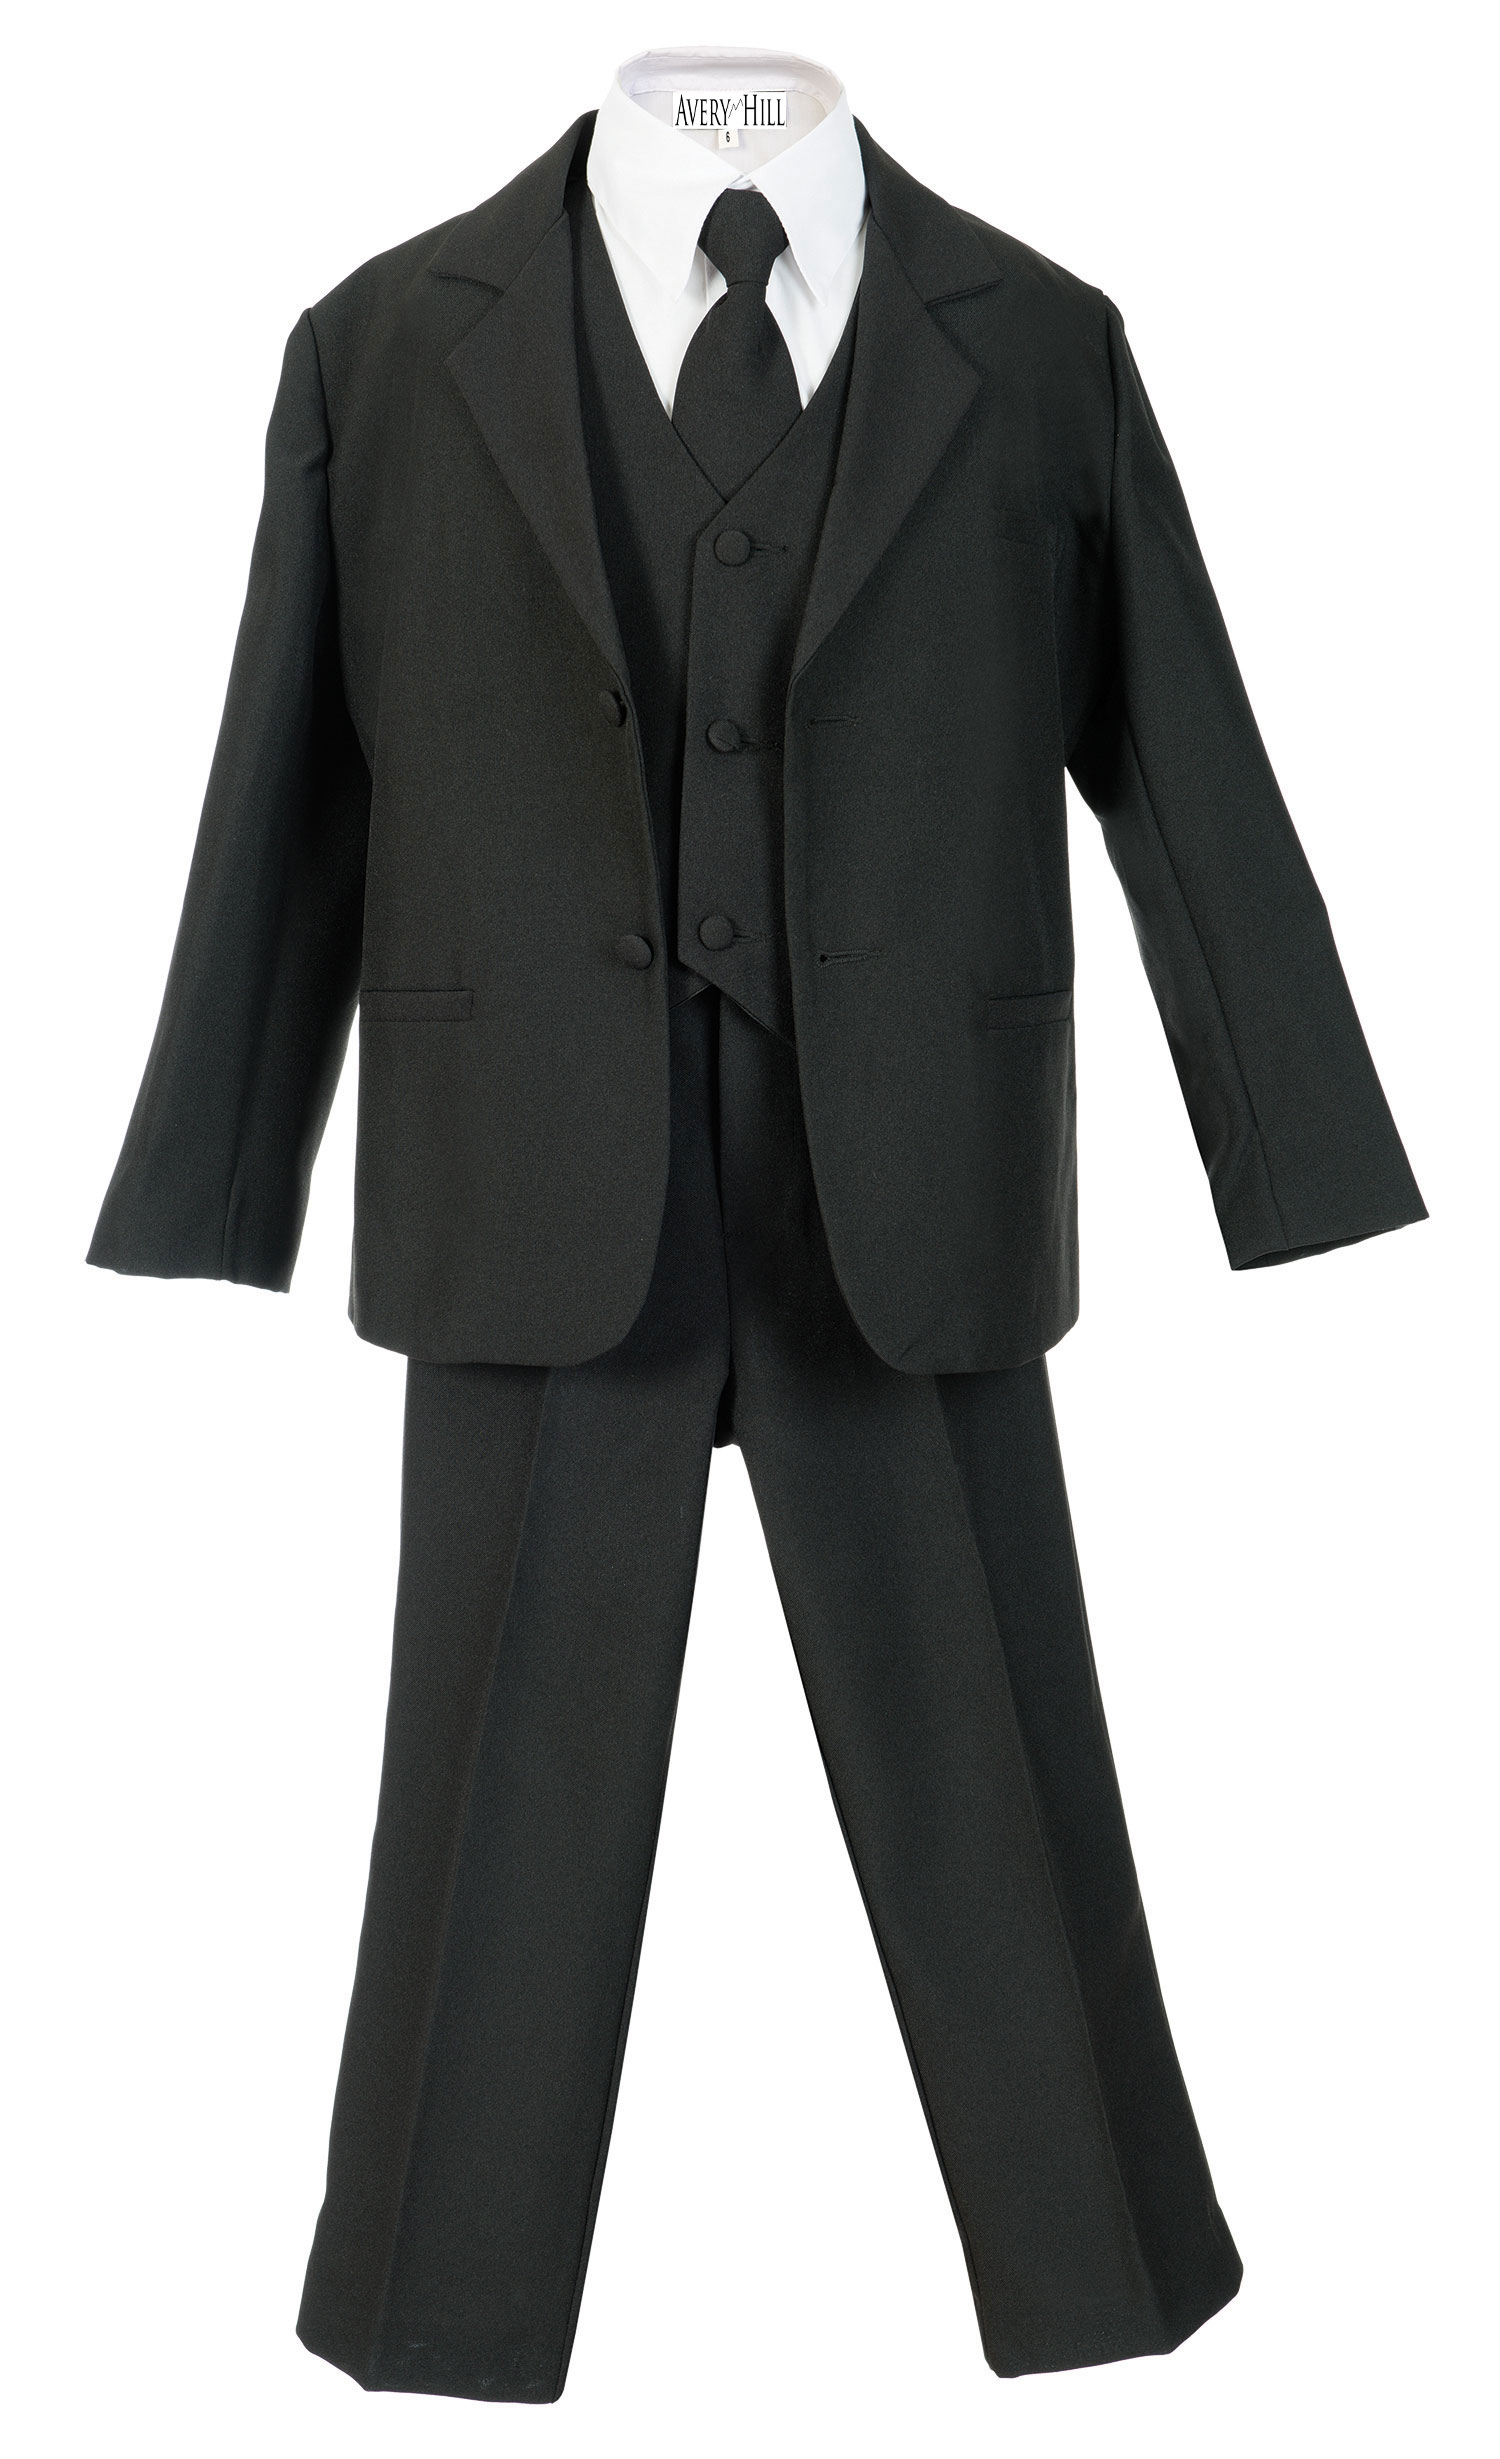 Avery Hill Boys Formal 5 Piece Suit with Shirt and Vest Black - S